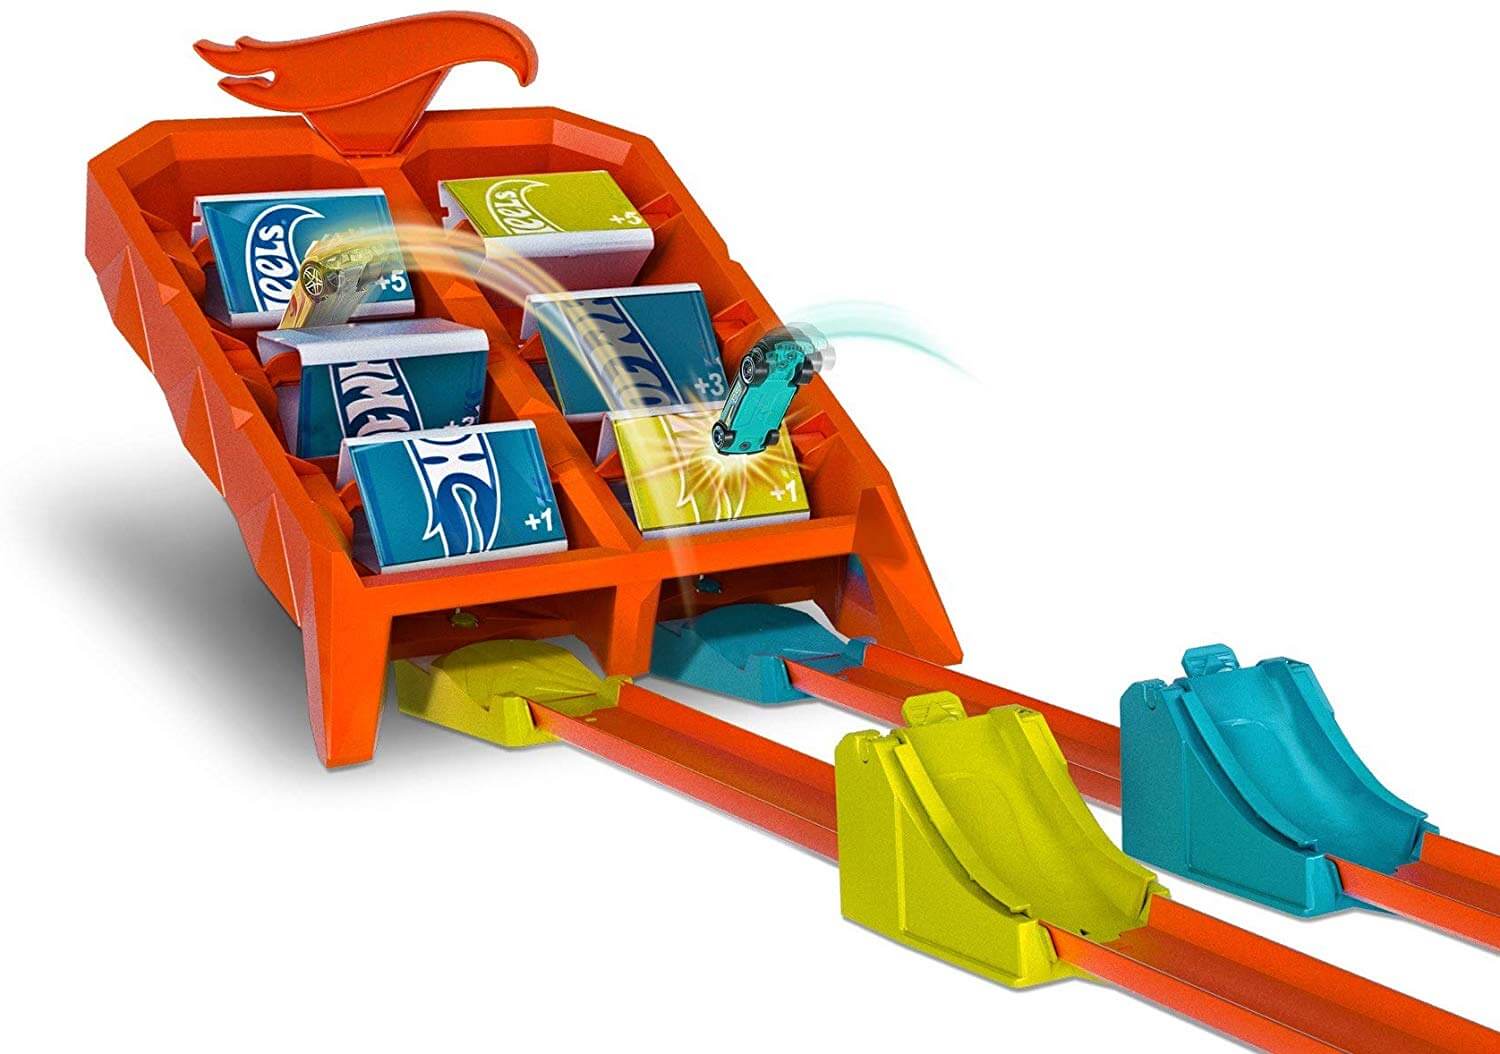 Hot Wheels Action Play Set for 1 or 2 Players Multiple Ways to Score